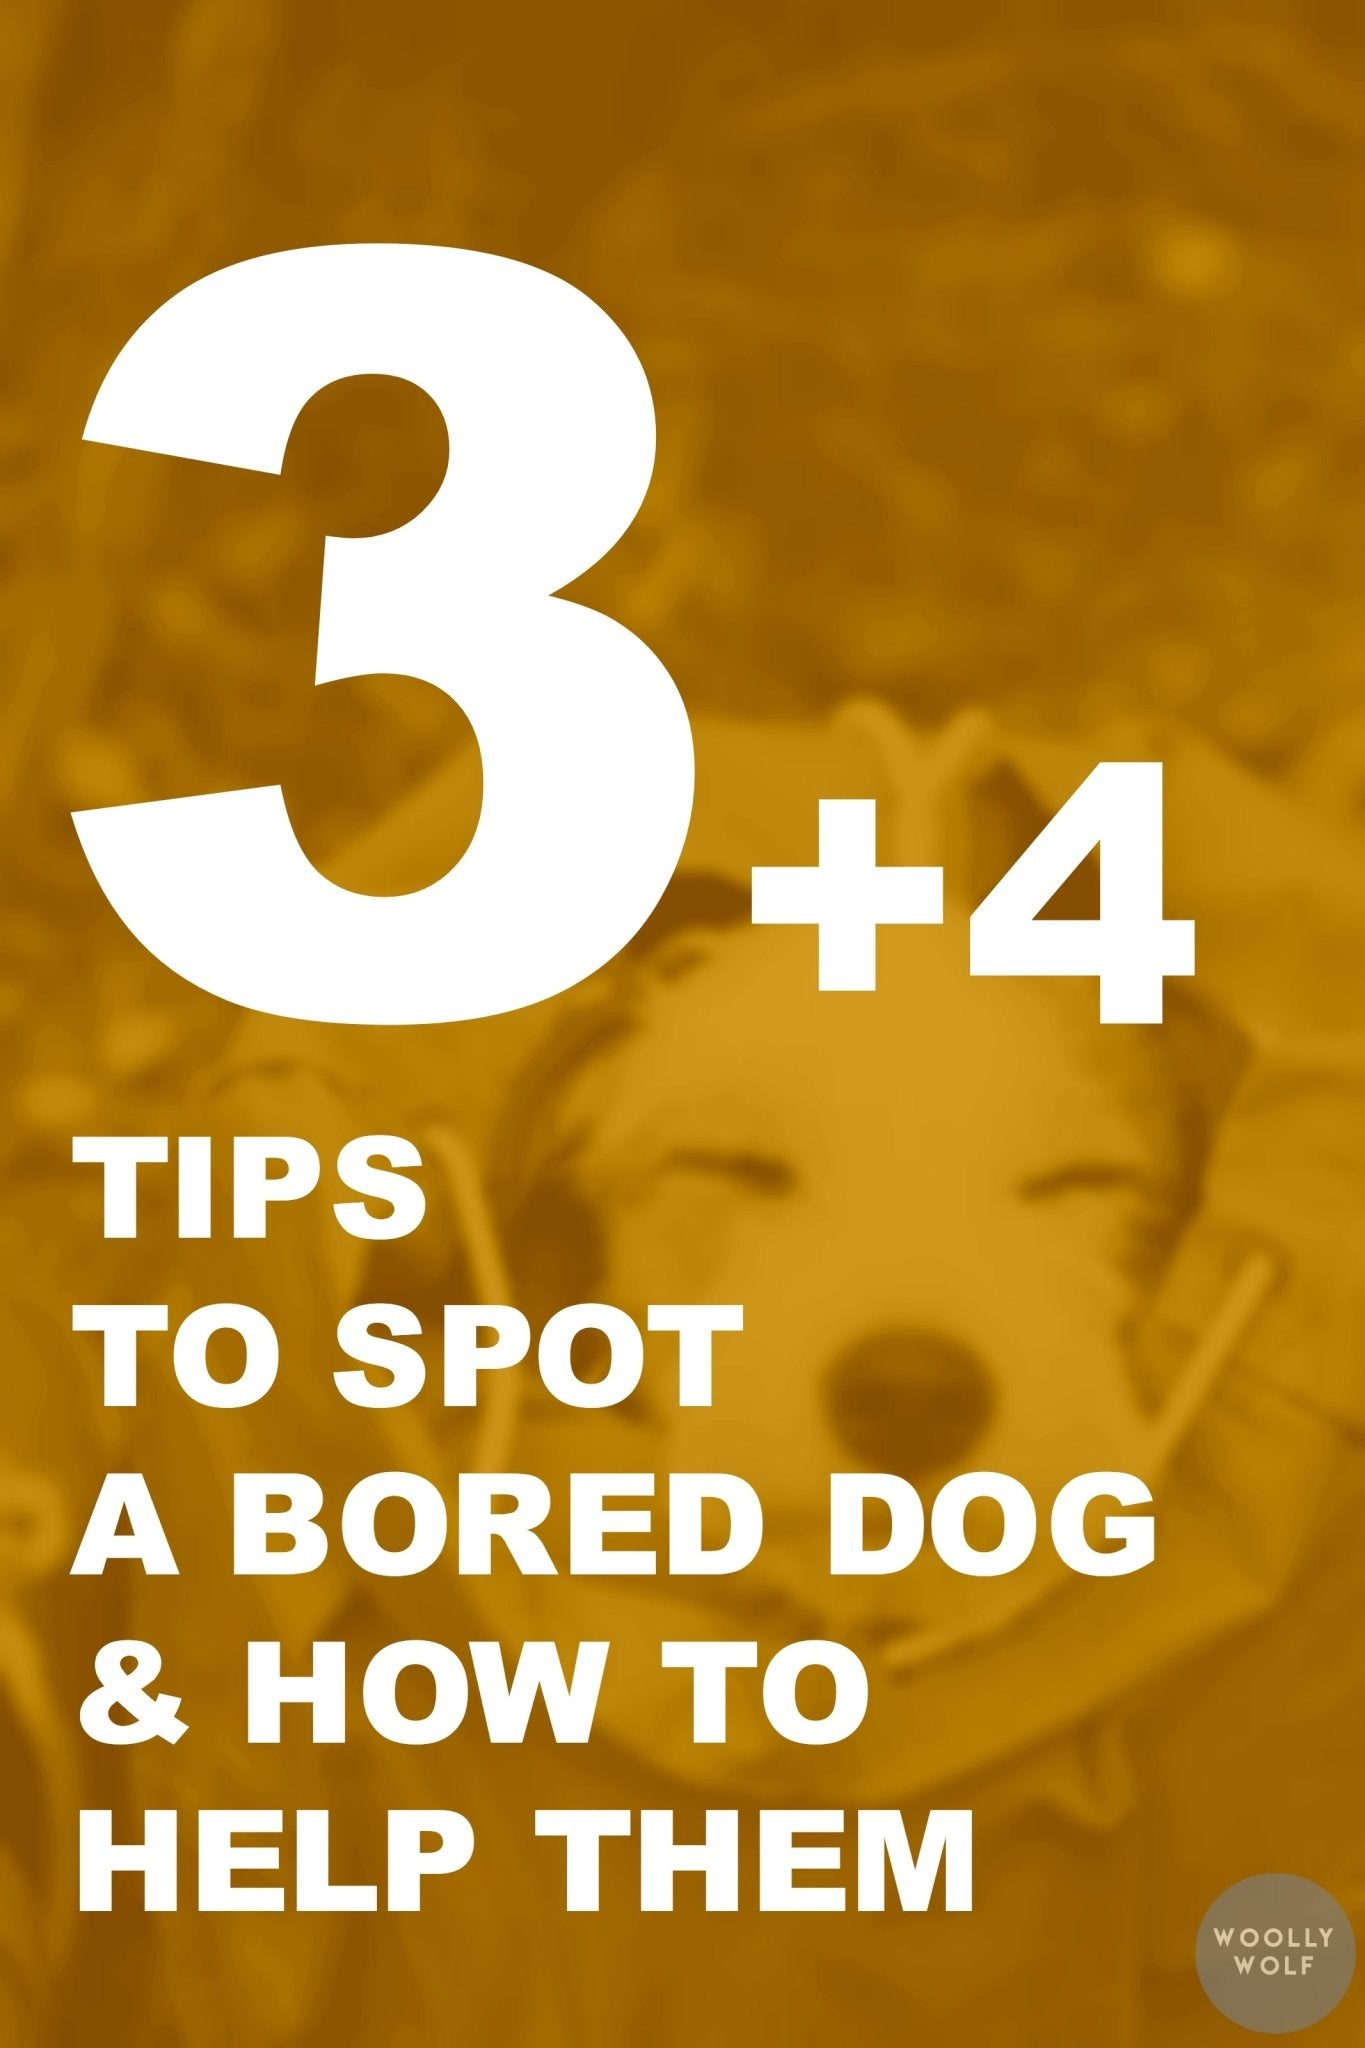 How to Help a Bored Dog